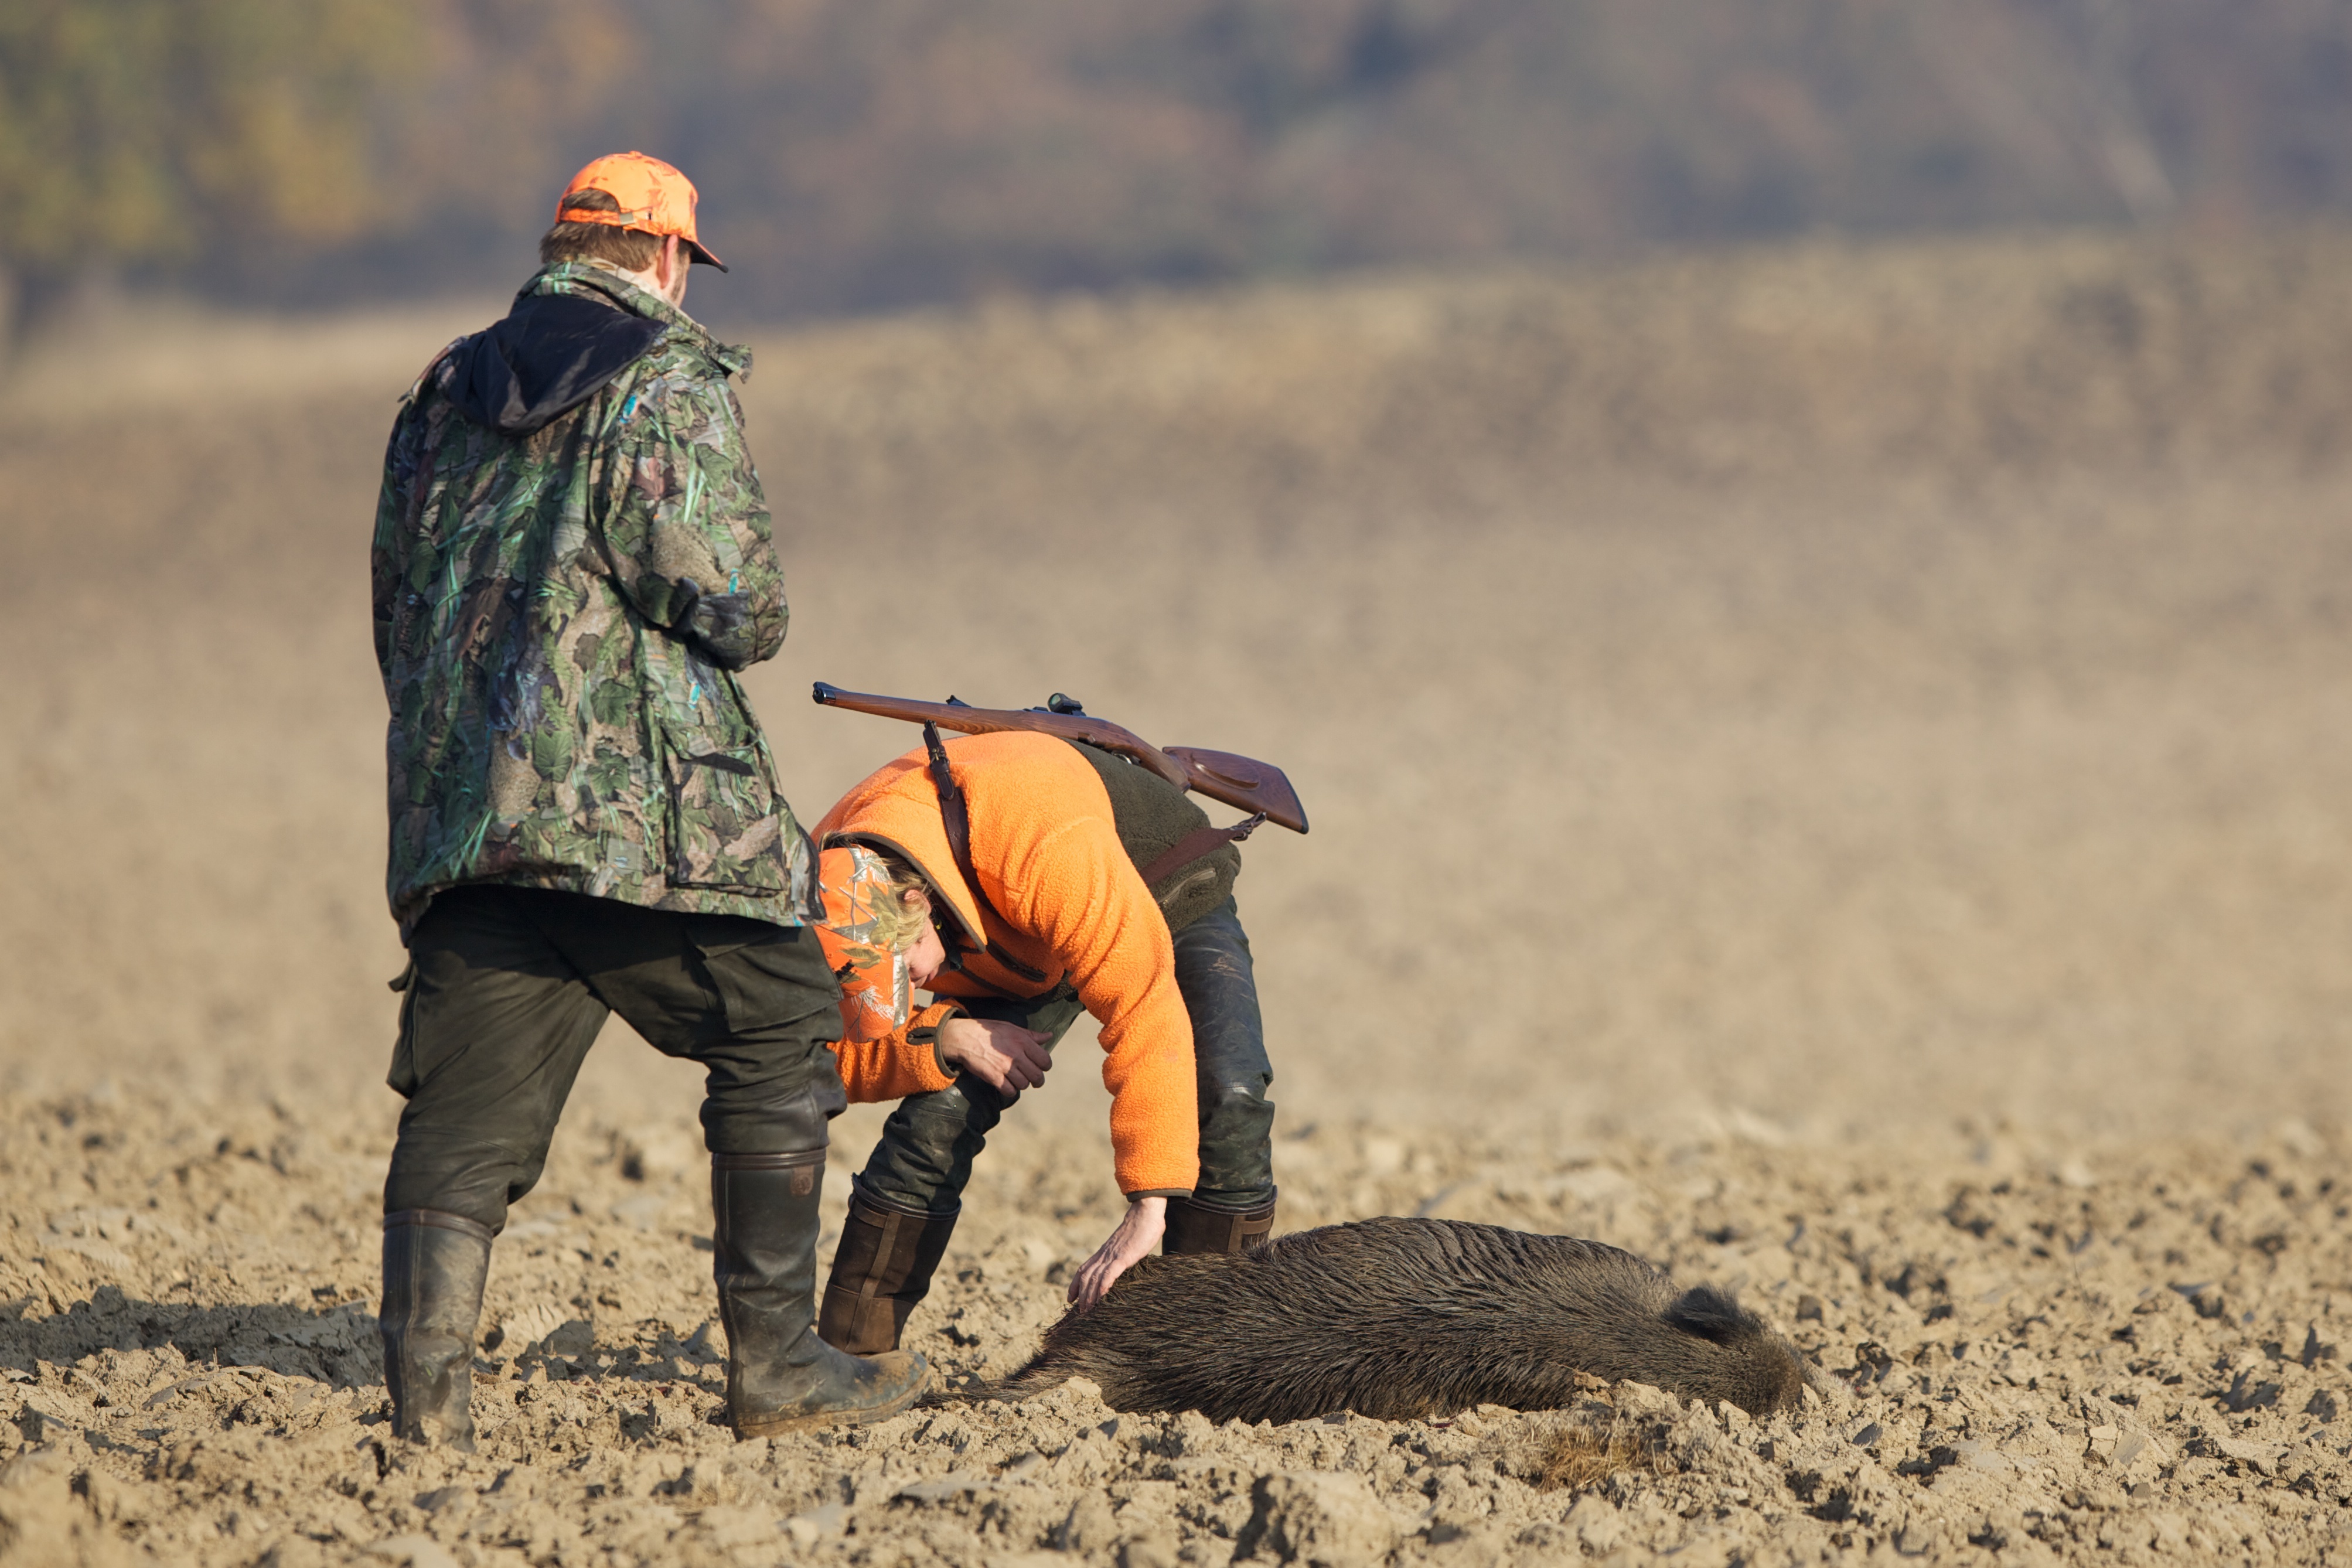 hunters examine a wild boar they have killed